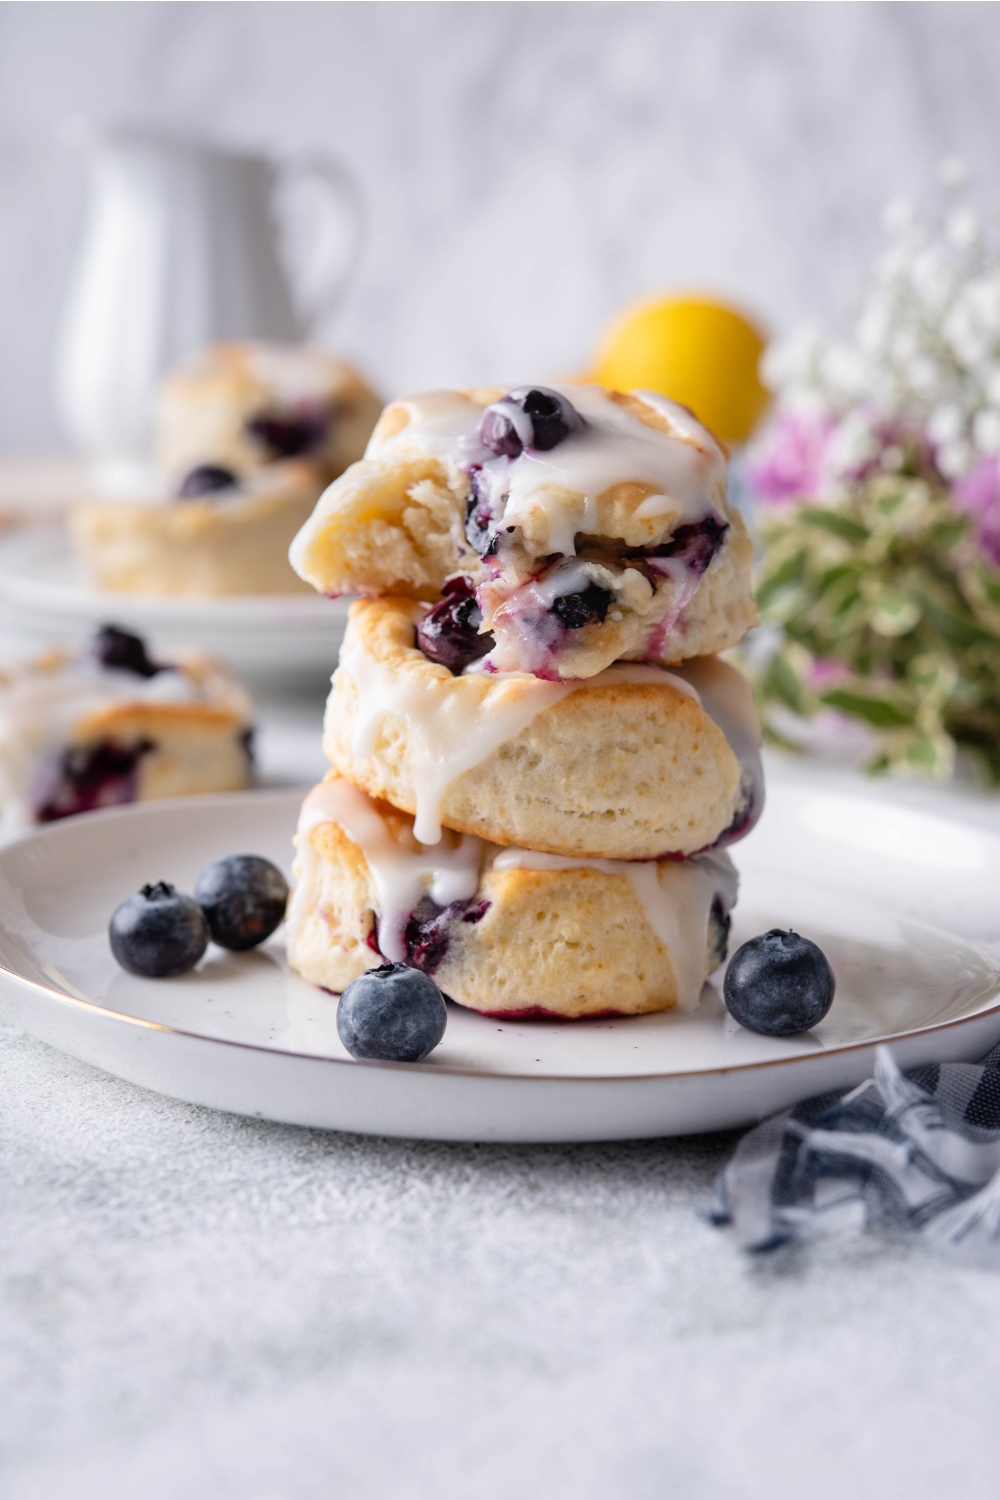 A stack of three blueberry biscuits topped with icing on a plate. The top biscuit has a bite taken out of it.